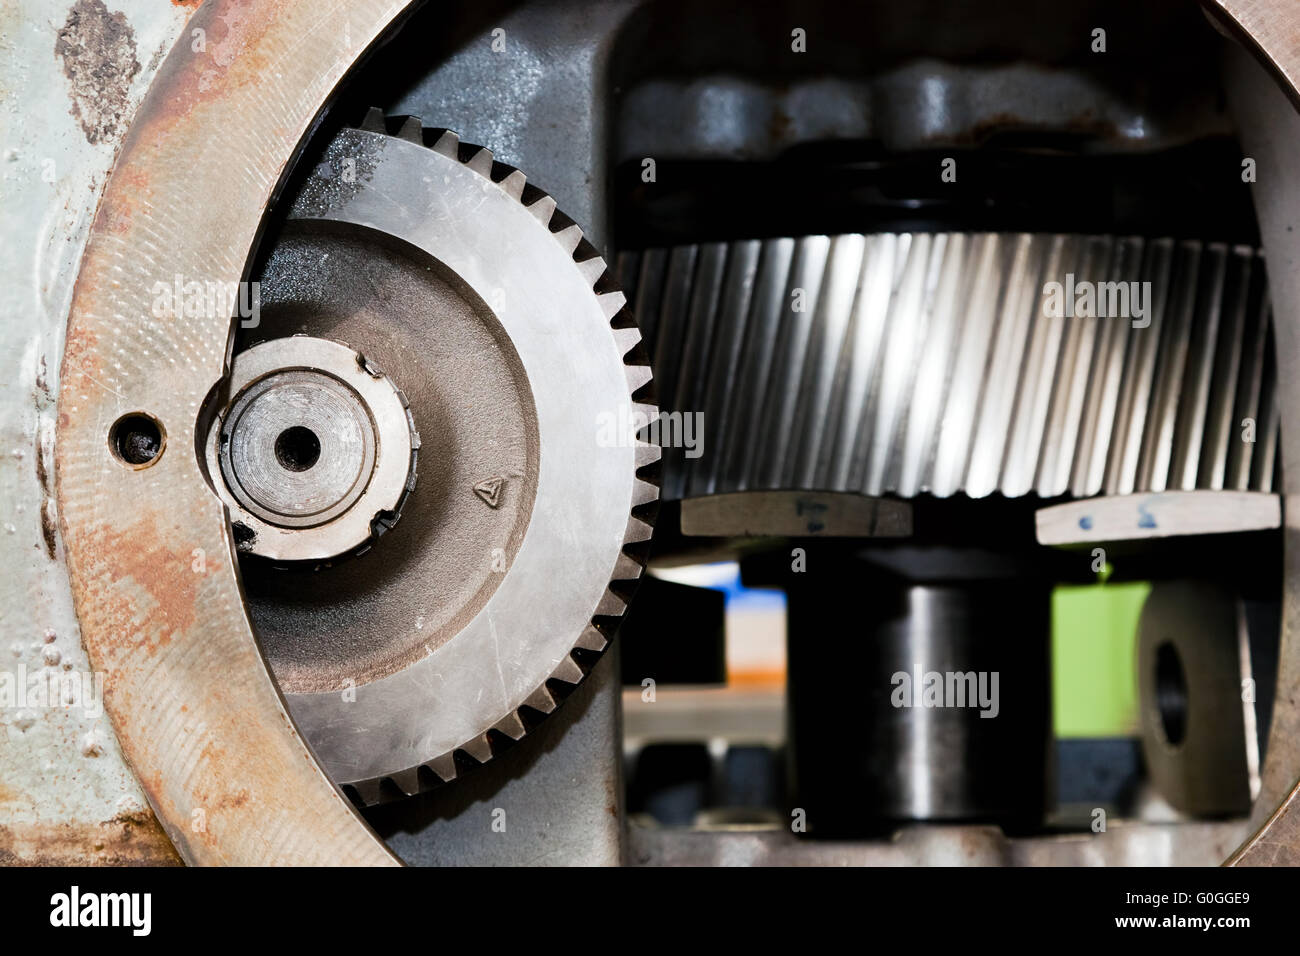 Gear machine industrial elements close-up. Industry Stock Photo